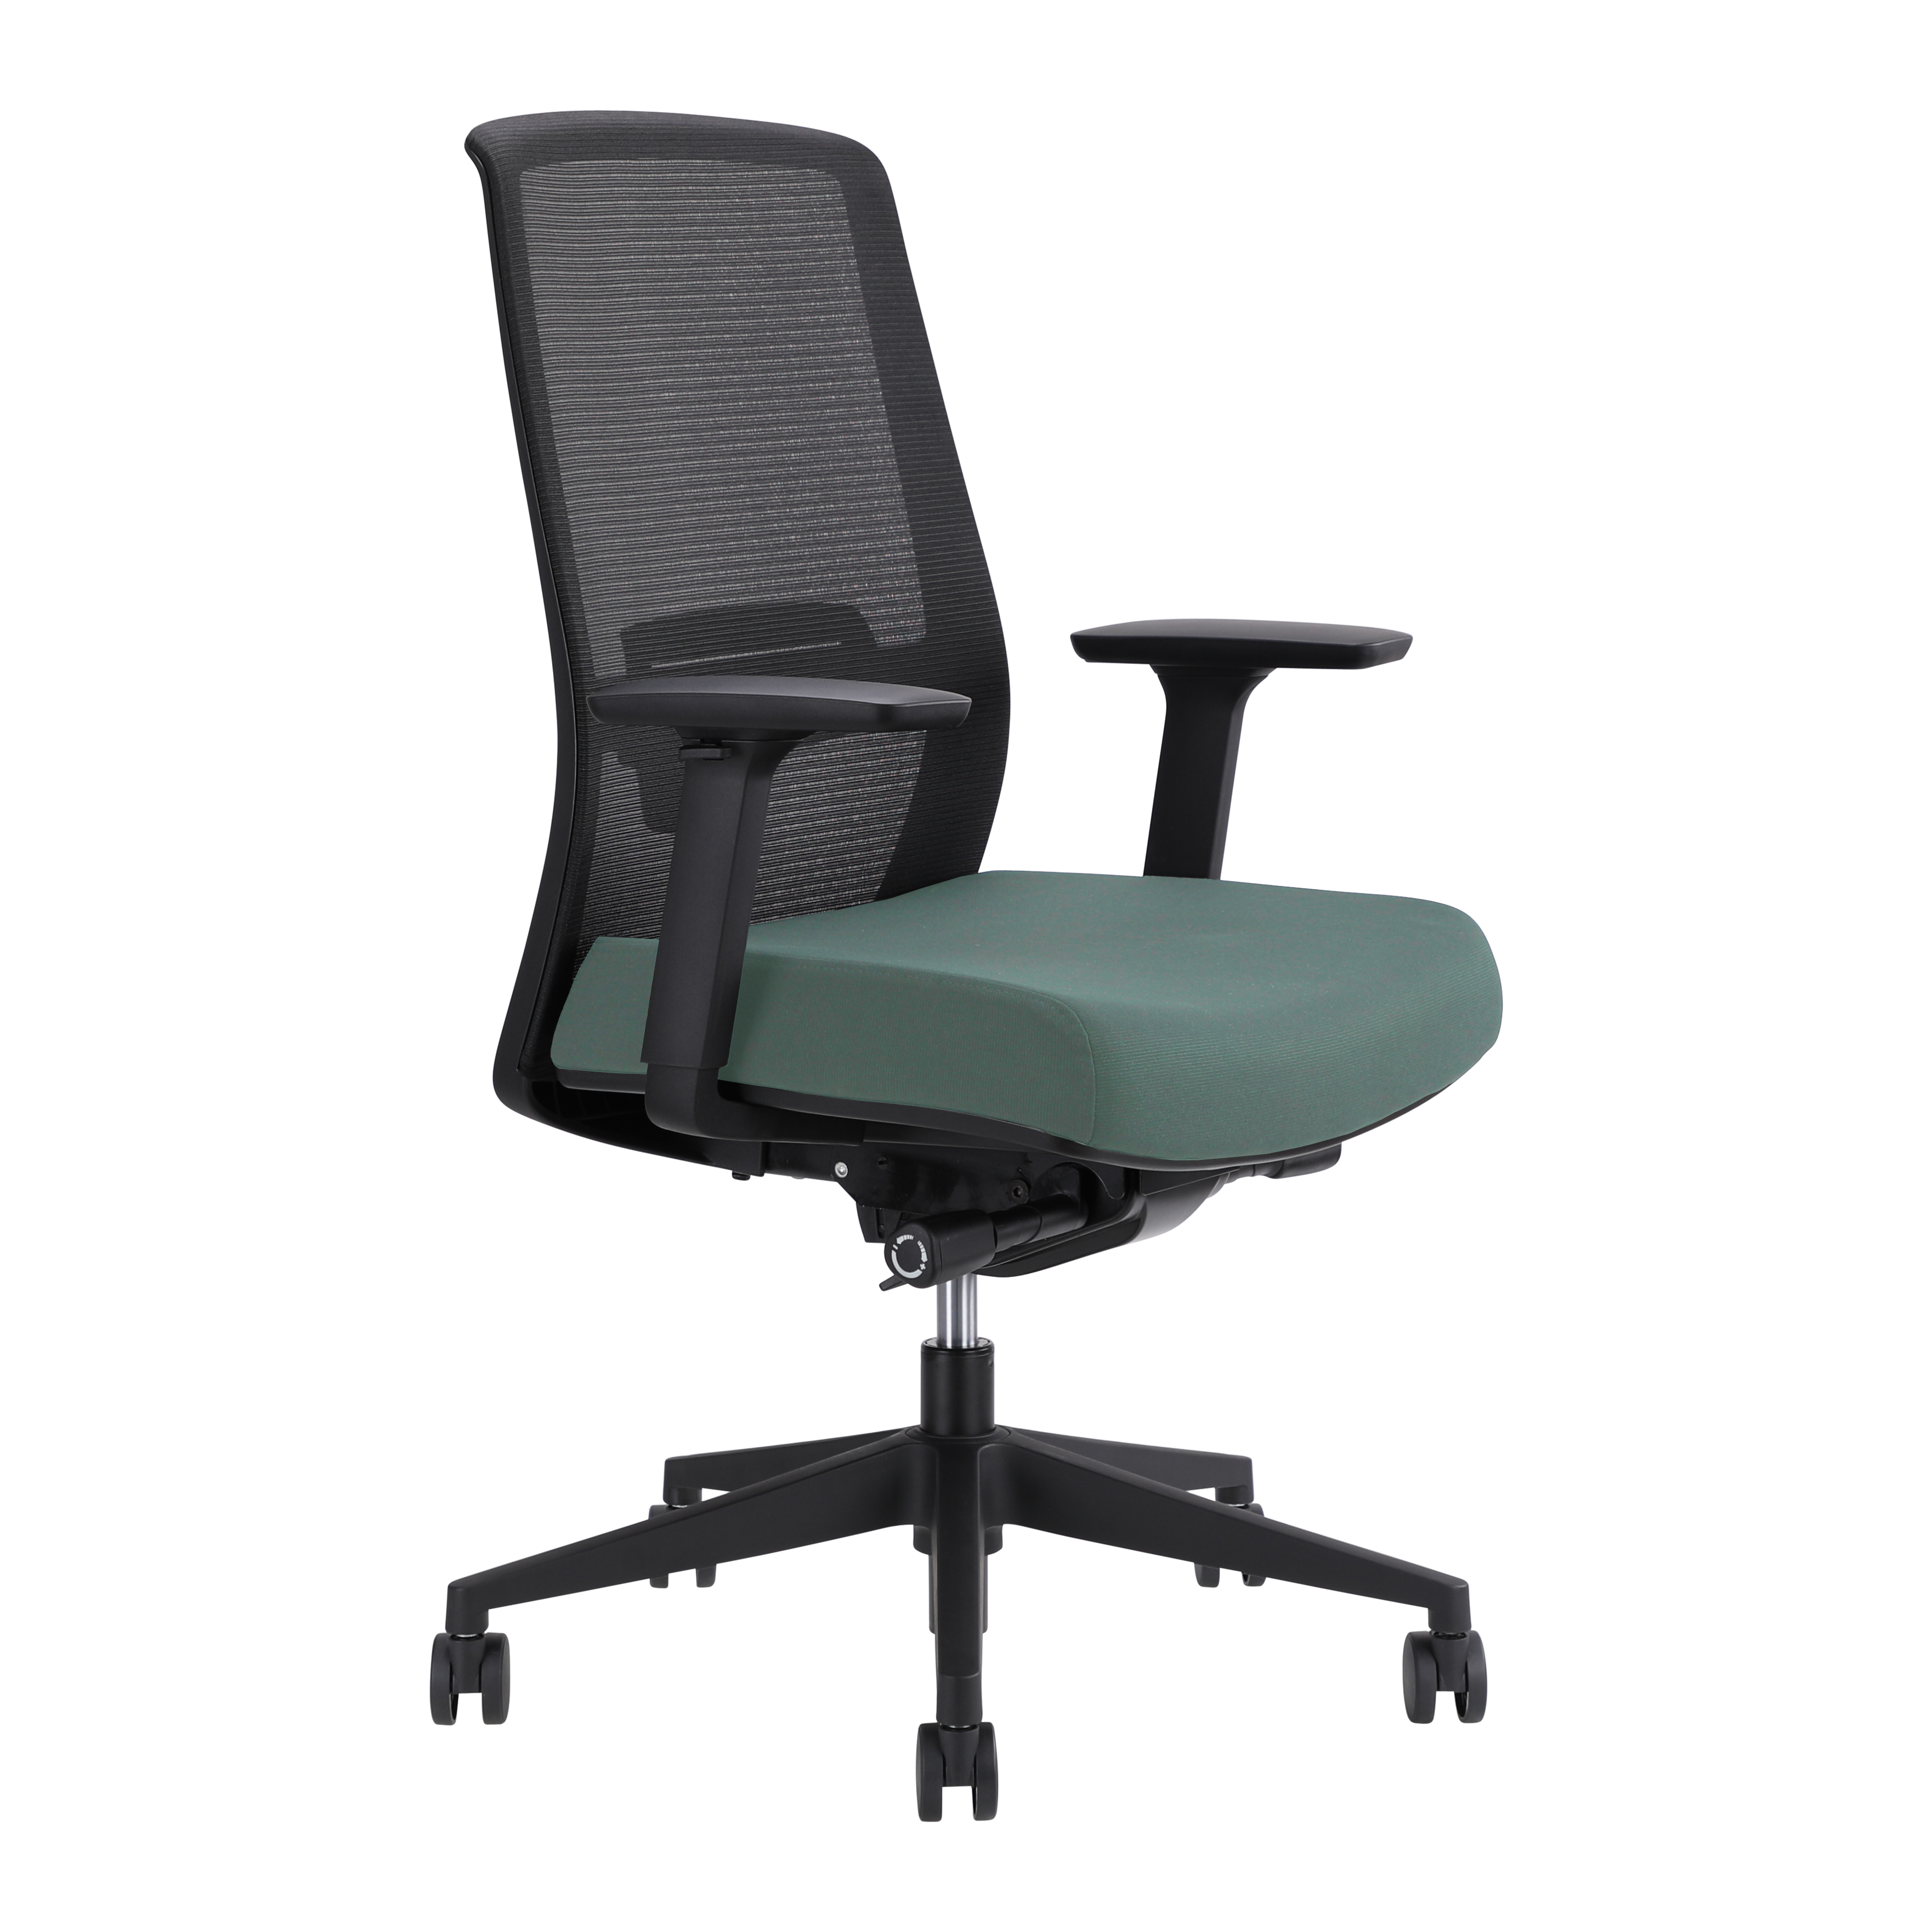 Jirra Side Control Synchro Task Chair (Teal / Adjustable Side Arms)